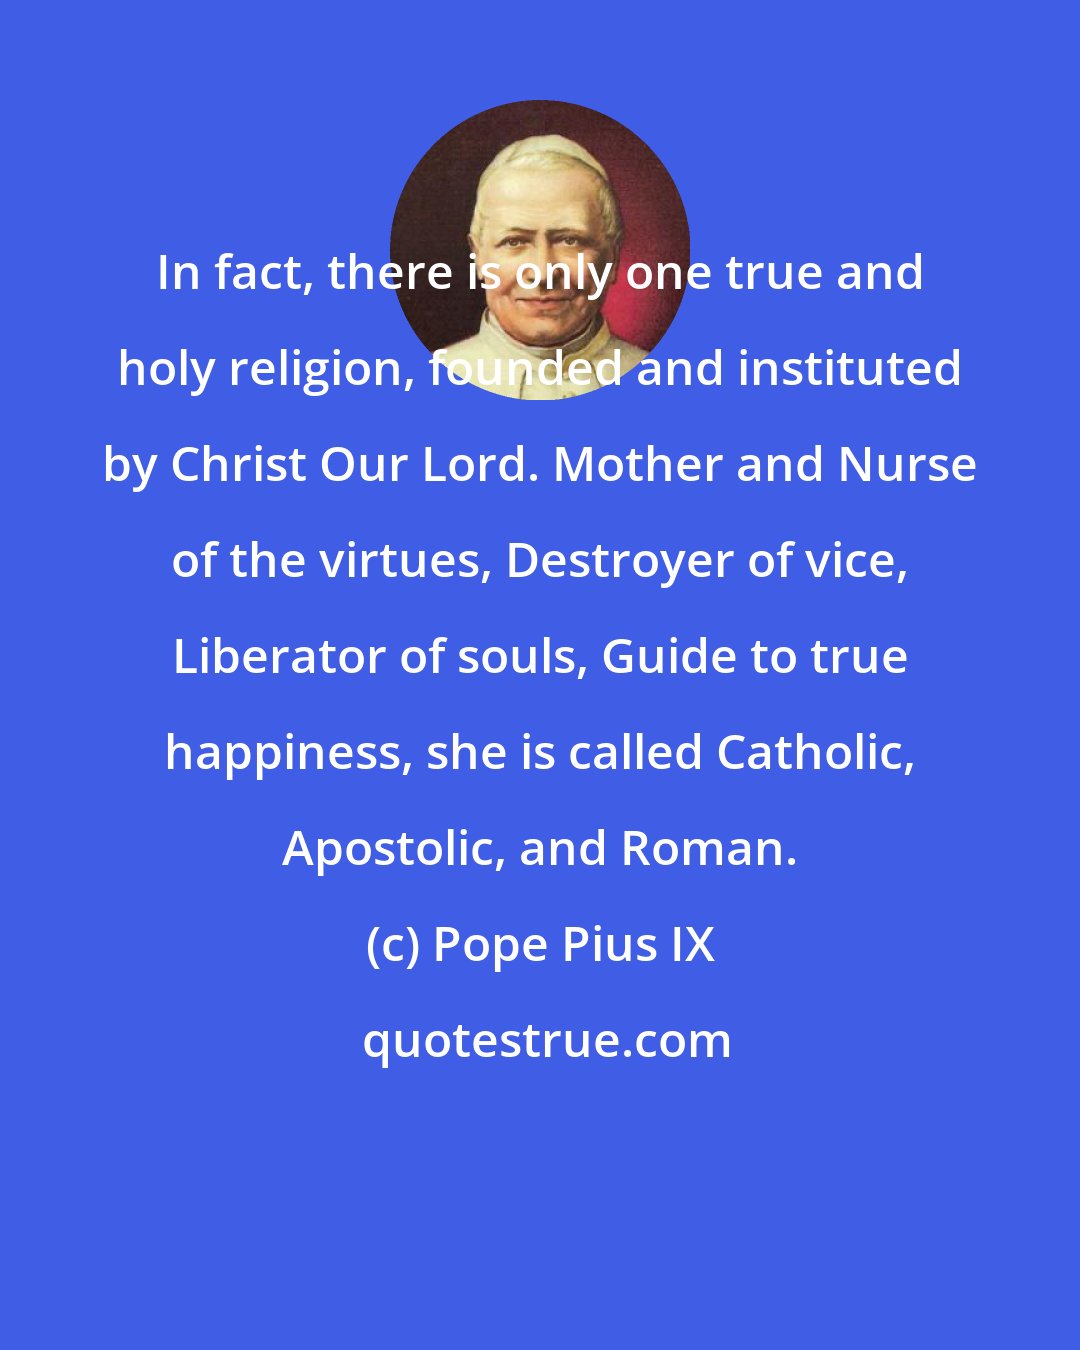 Pope Pius IX: In fact, there is only one true and holy religion, founded and instituted by Christ Our Lord. Mother and Nurse of the virtues, Destroyer of vice, Liberator of souls, Guide to true happiness, she is called Catholic, Apostolic, and Roman.